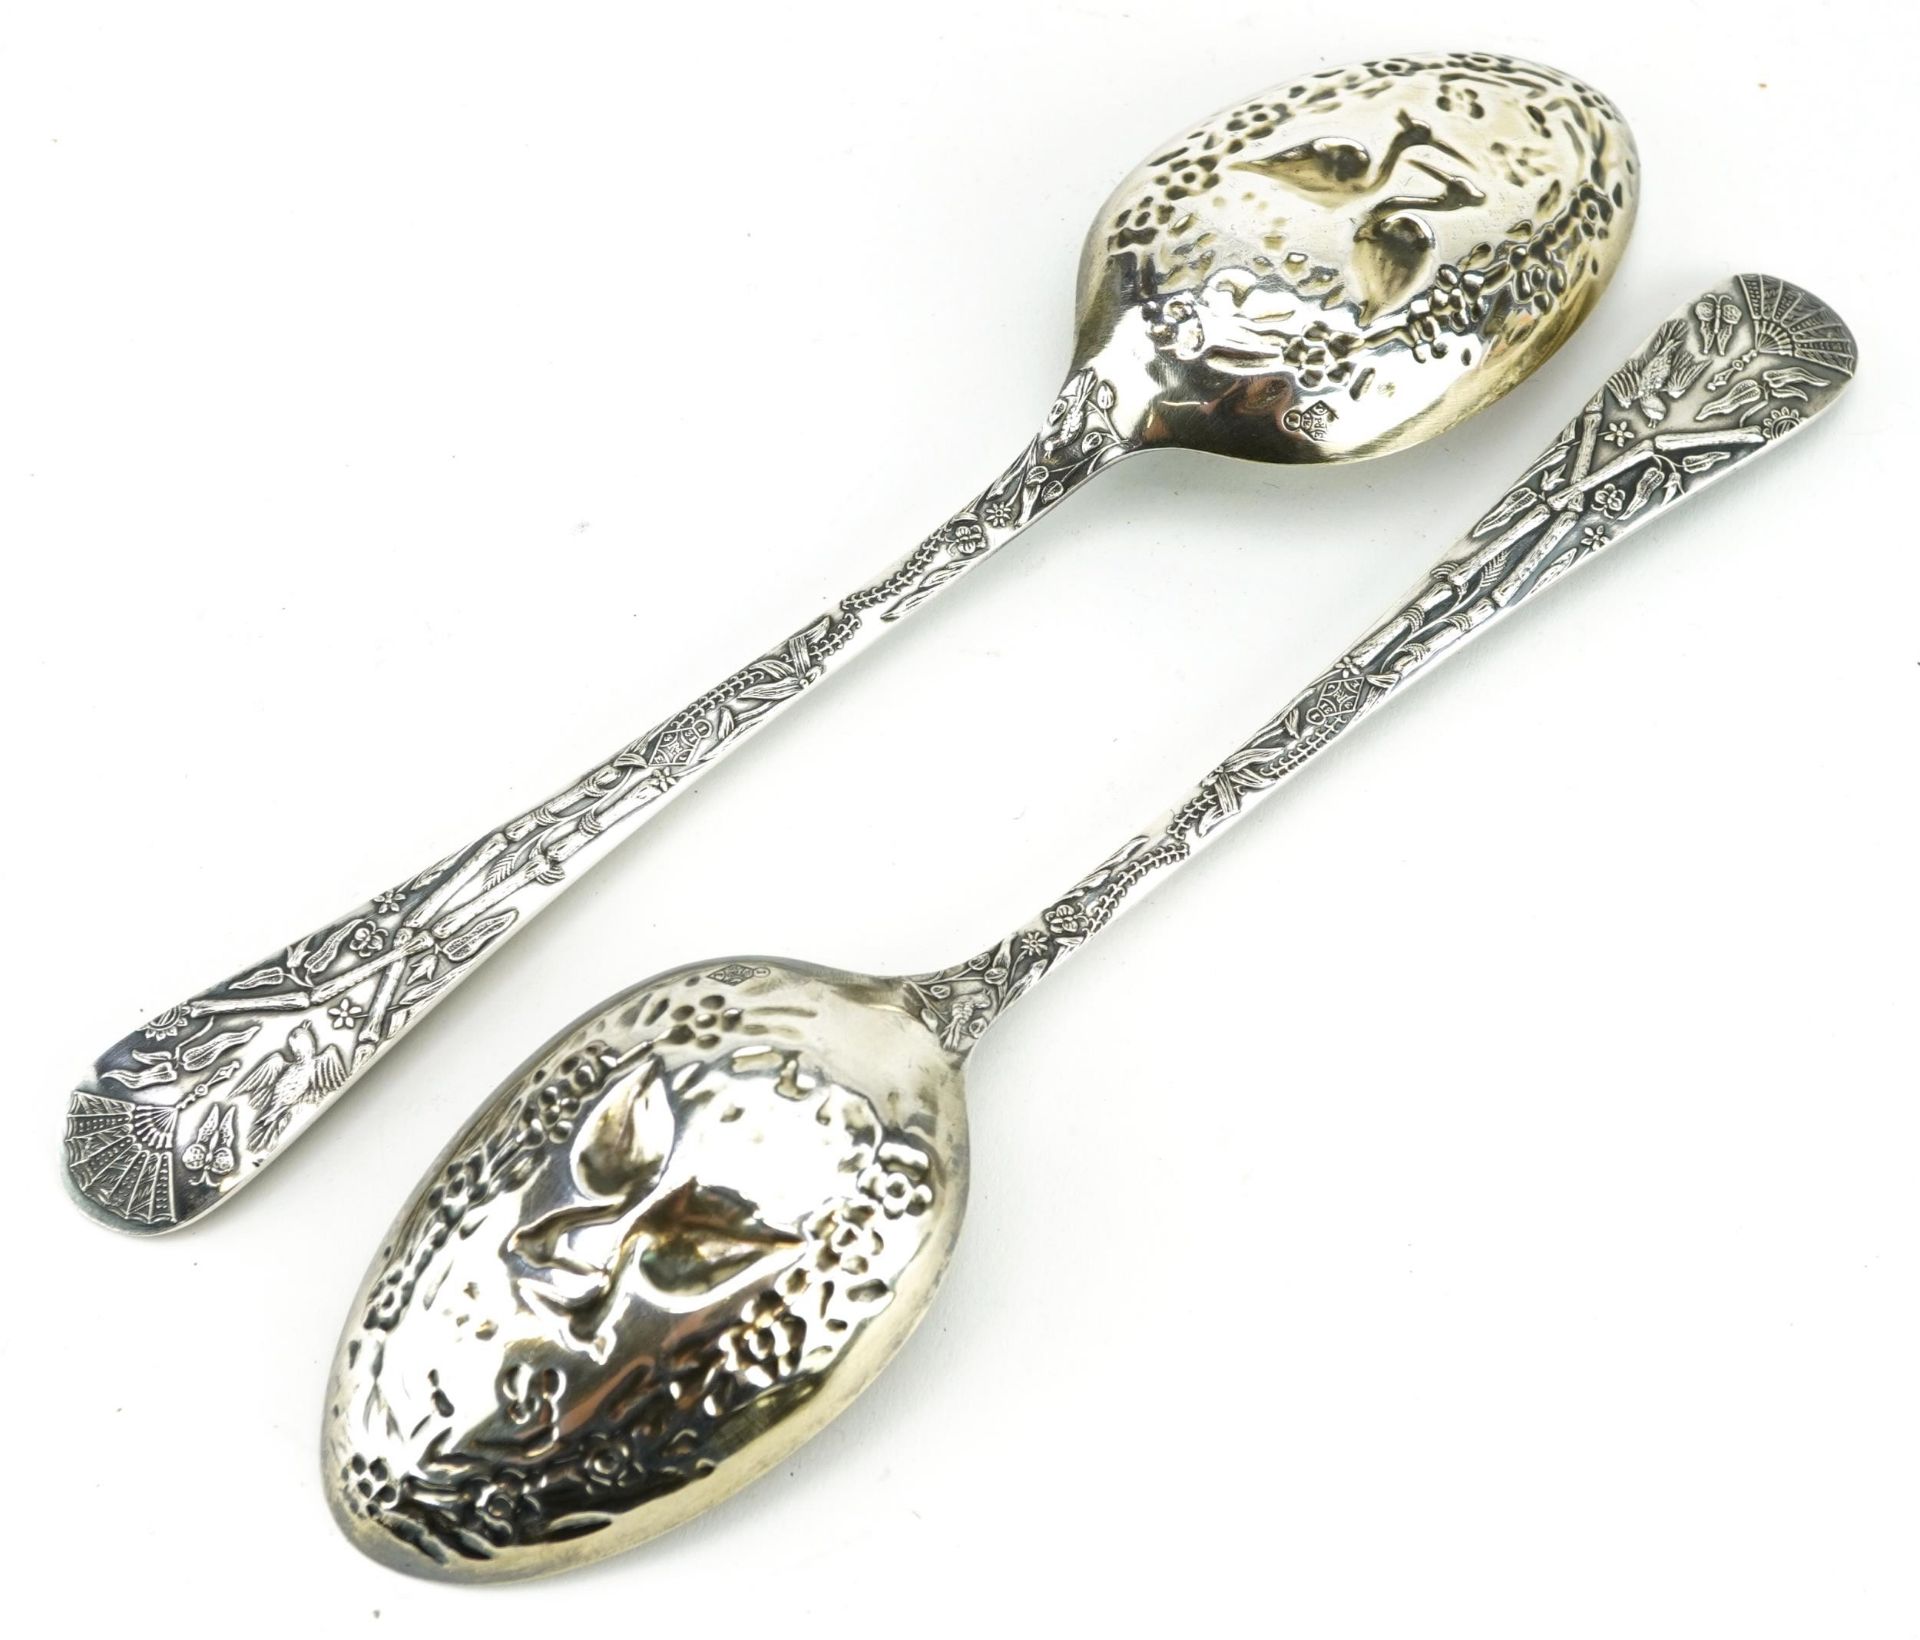 Pair of Victorian aesthetic silver plated tablespoons embossed with birds, butterflies, flowers - Image 2 of 3